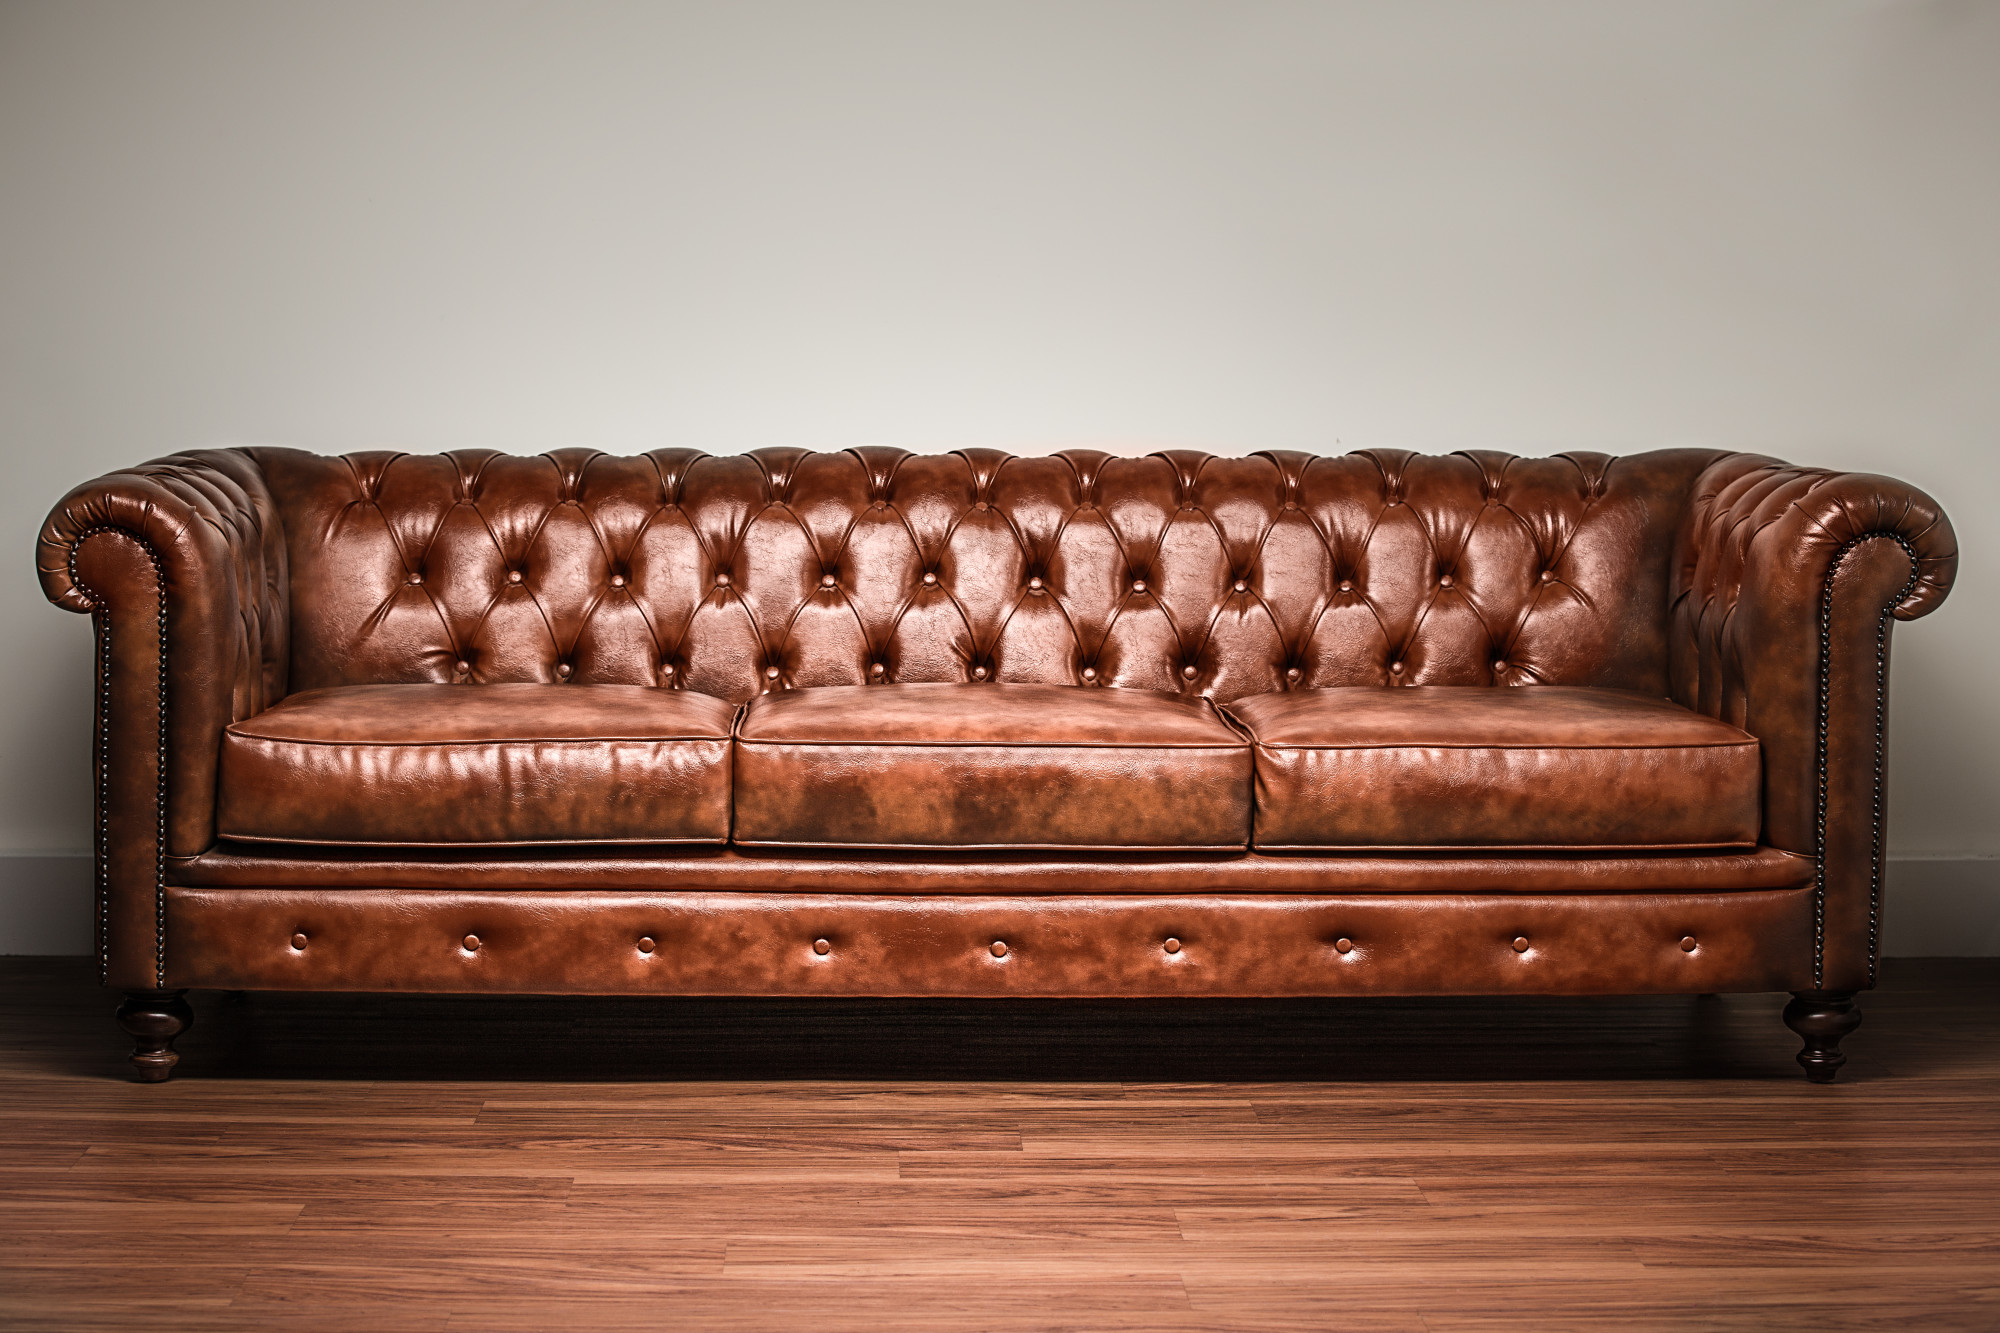 It is important to do what you can to take care of your leather furniture. Let us help you out with this quick guide on how to properly clean leather.